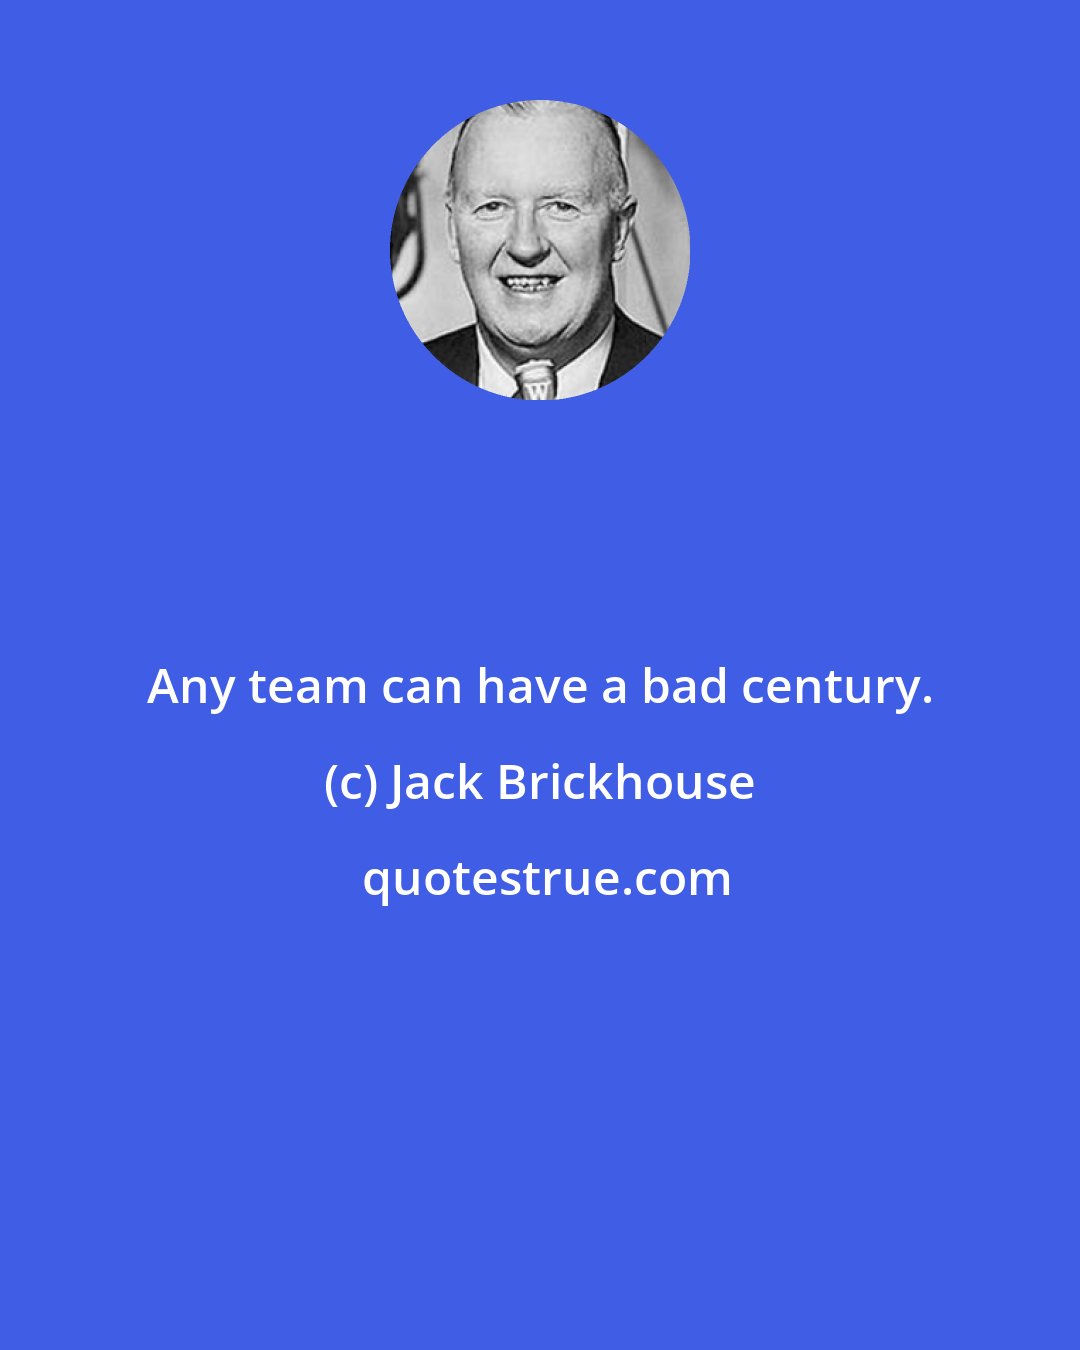 Jack Brickhouse: Any team can have a bad century.